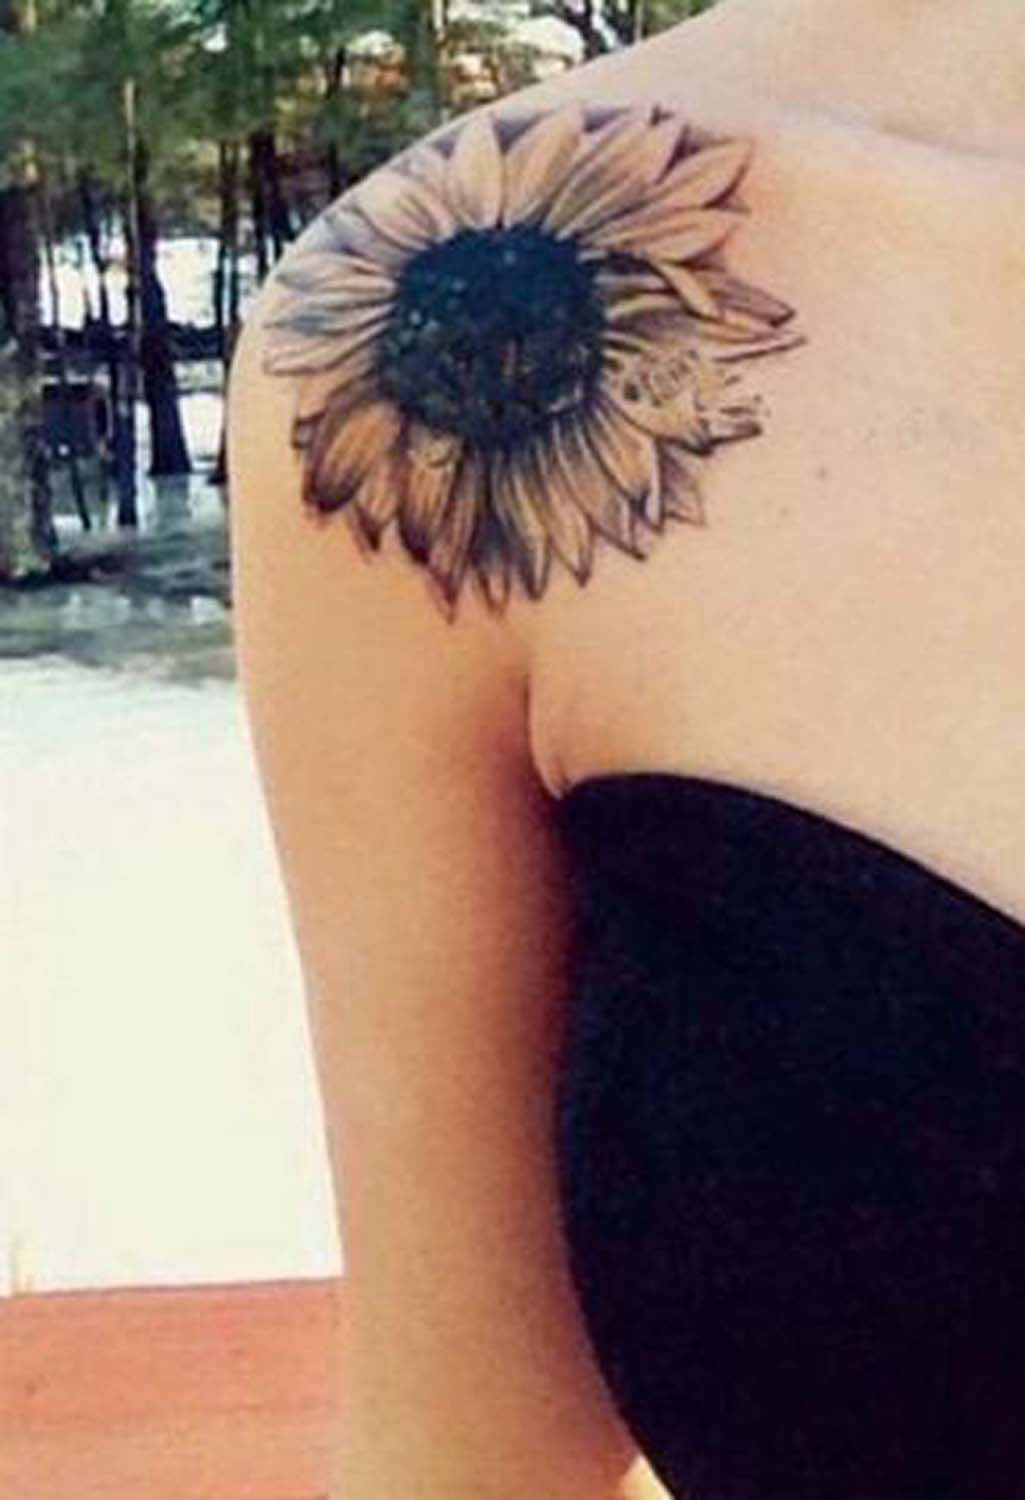 20 of the Most Boujee Sunflower Tattoo Ideas  Sunflower tattoo shoulder  Tattoos Sunflower tattoos